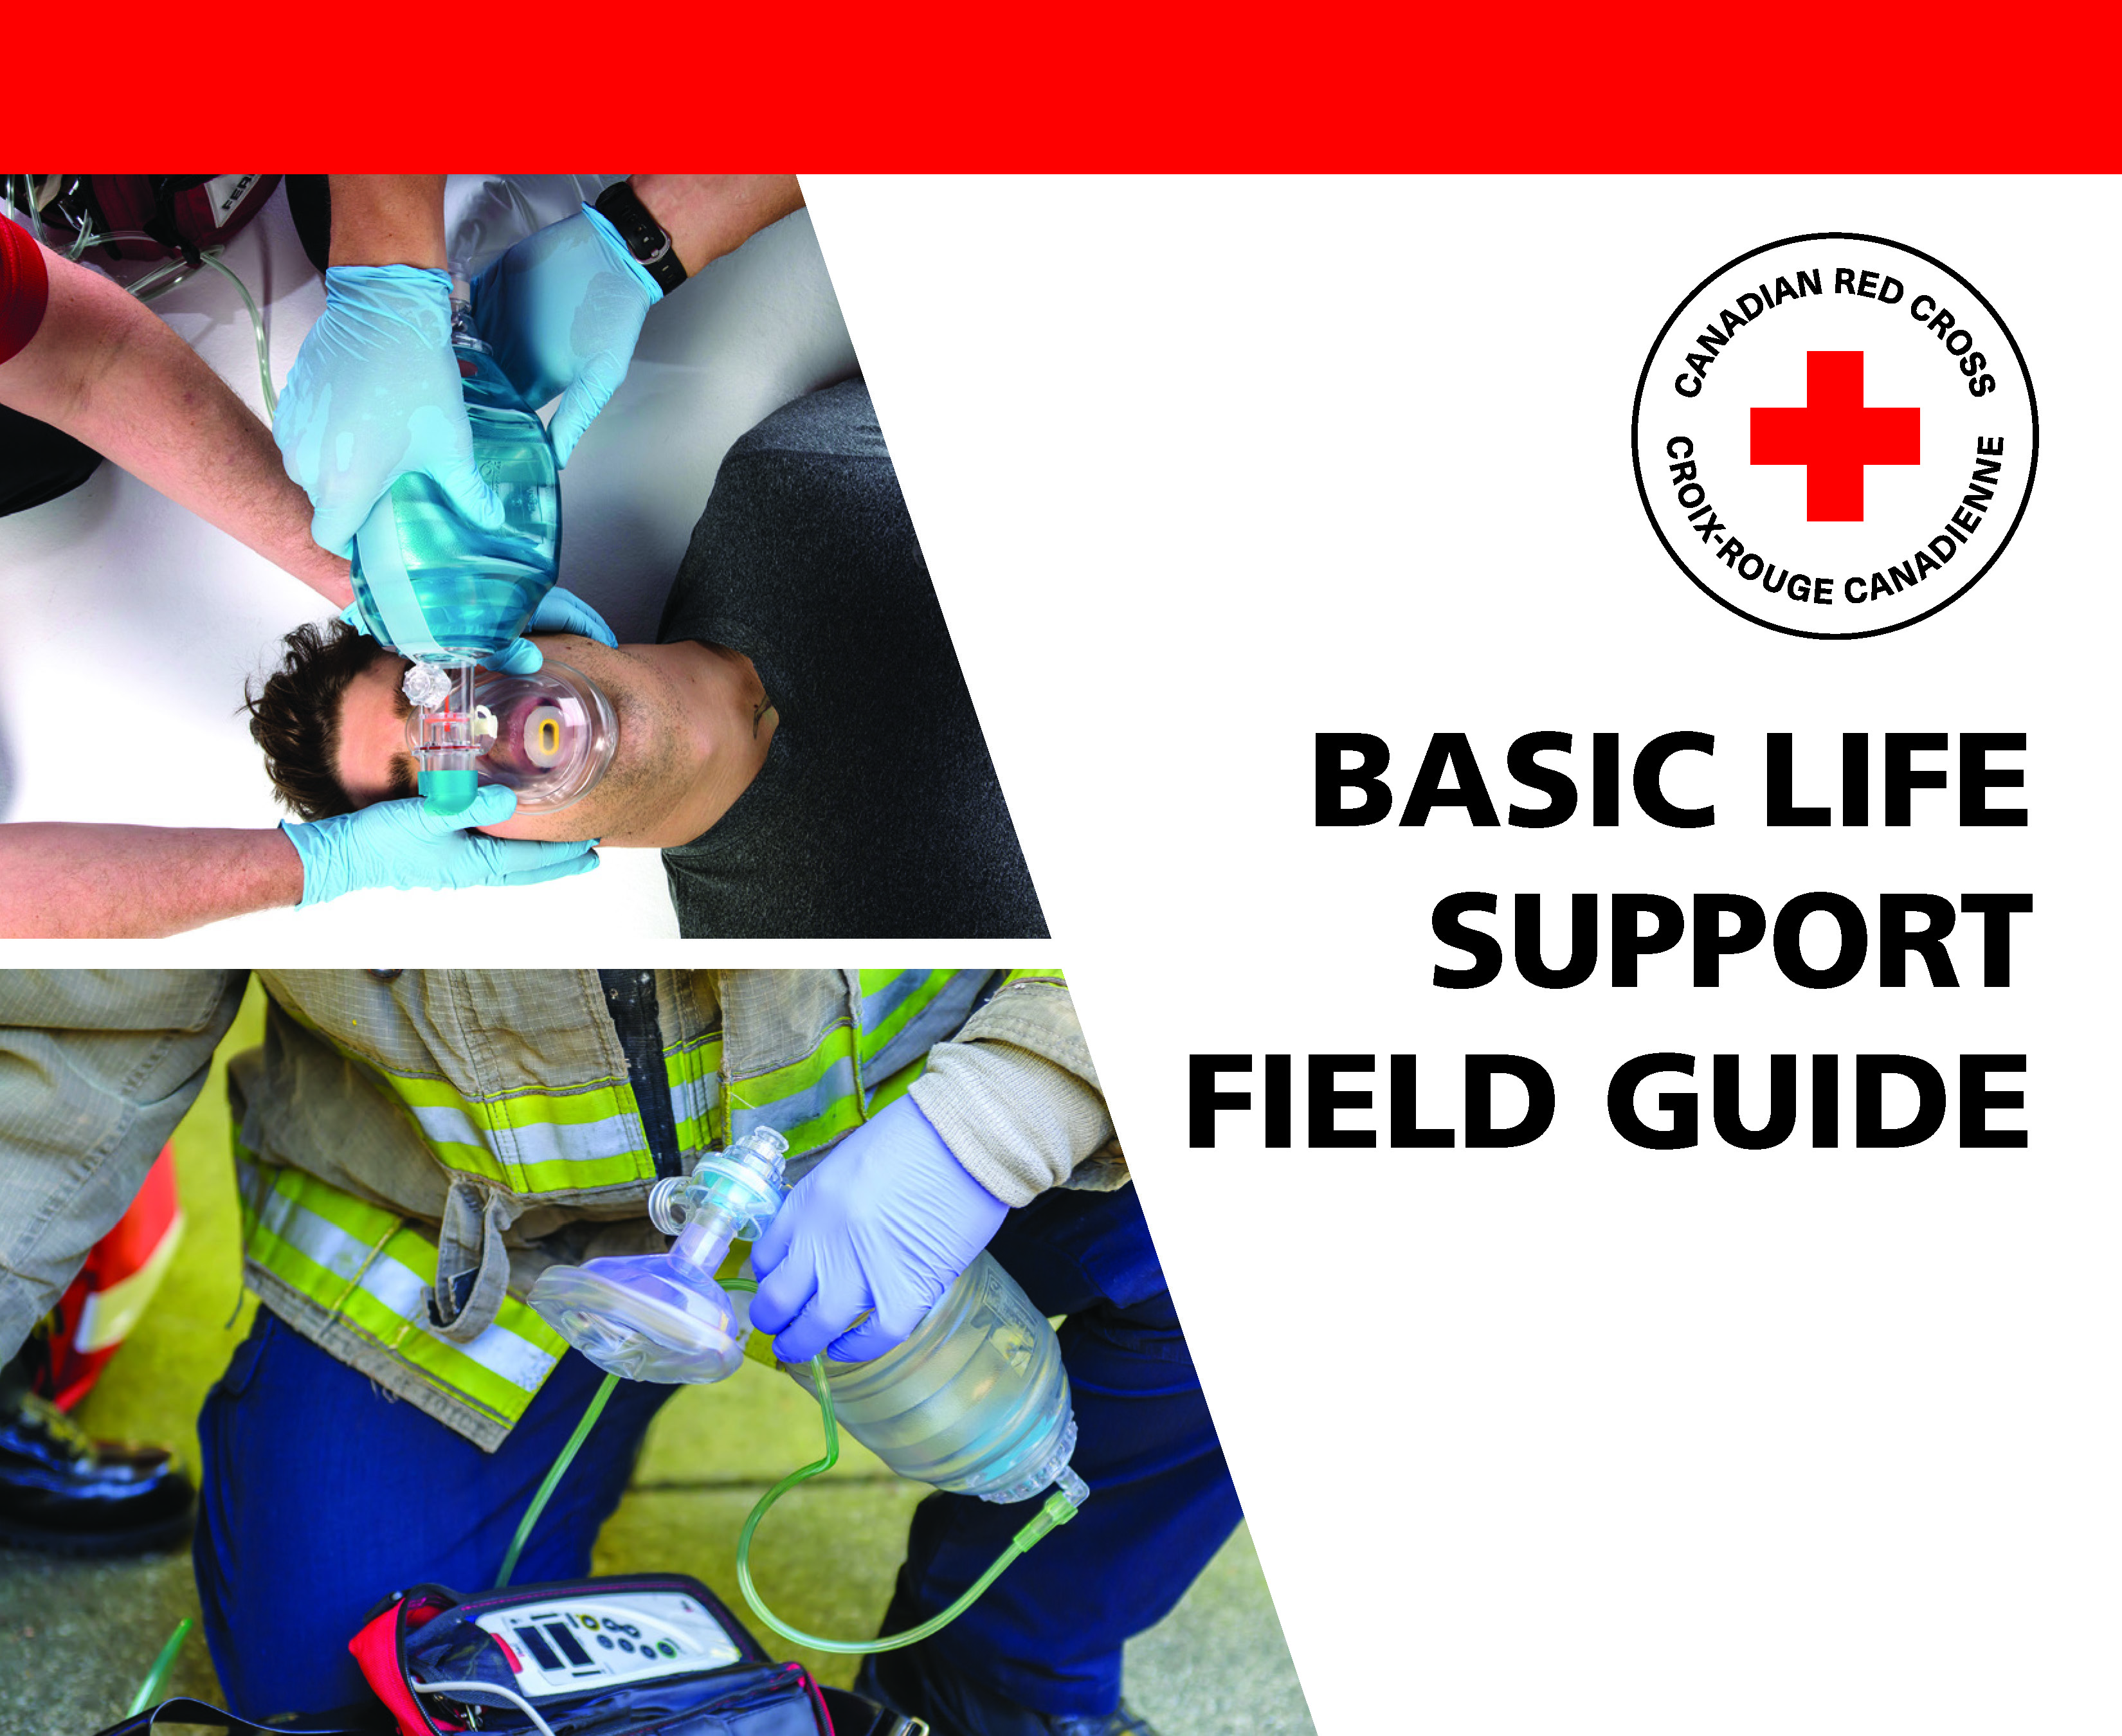 First Aid Course Materials for Airway Management